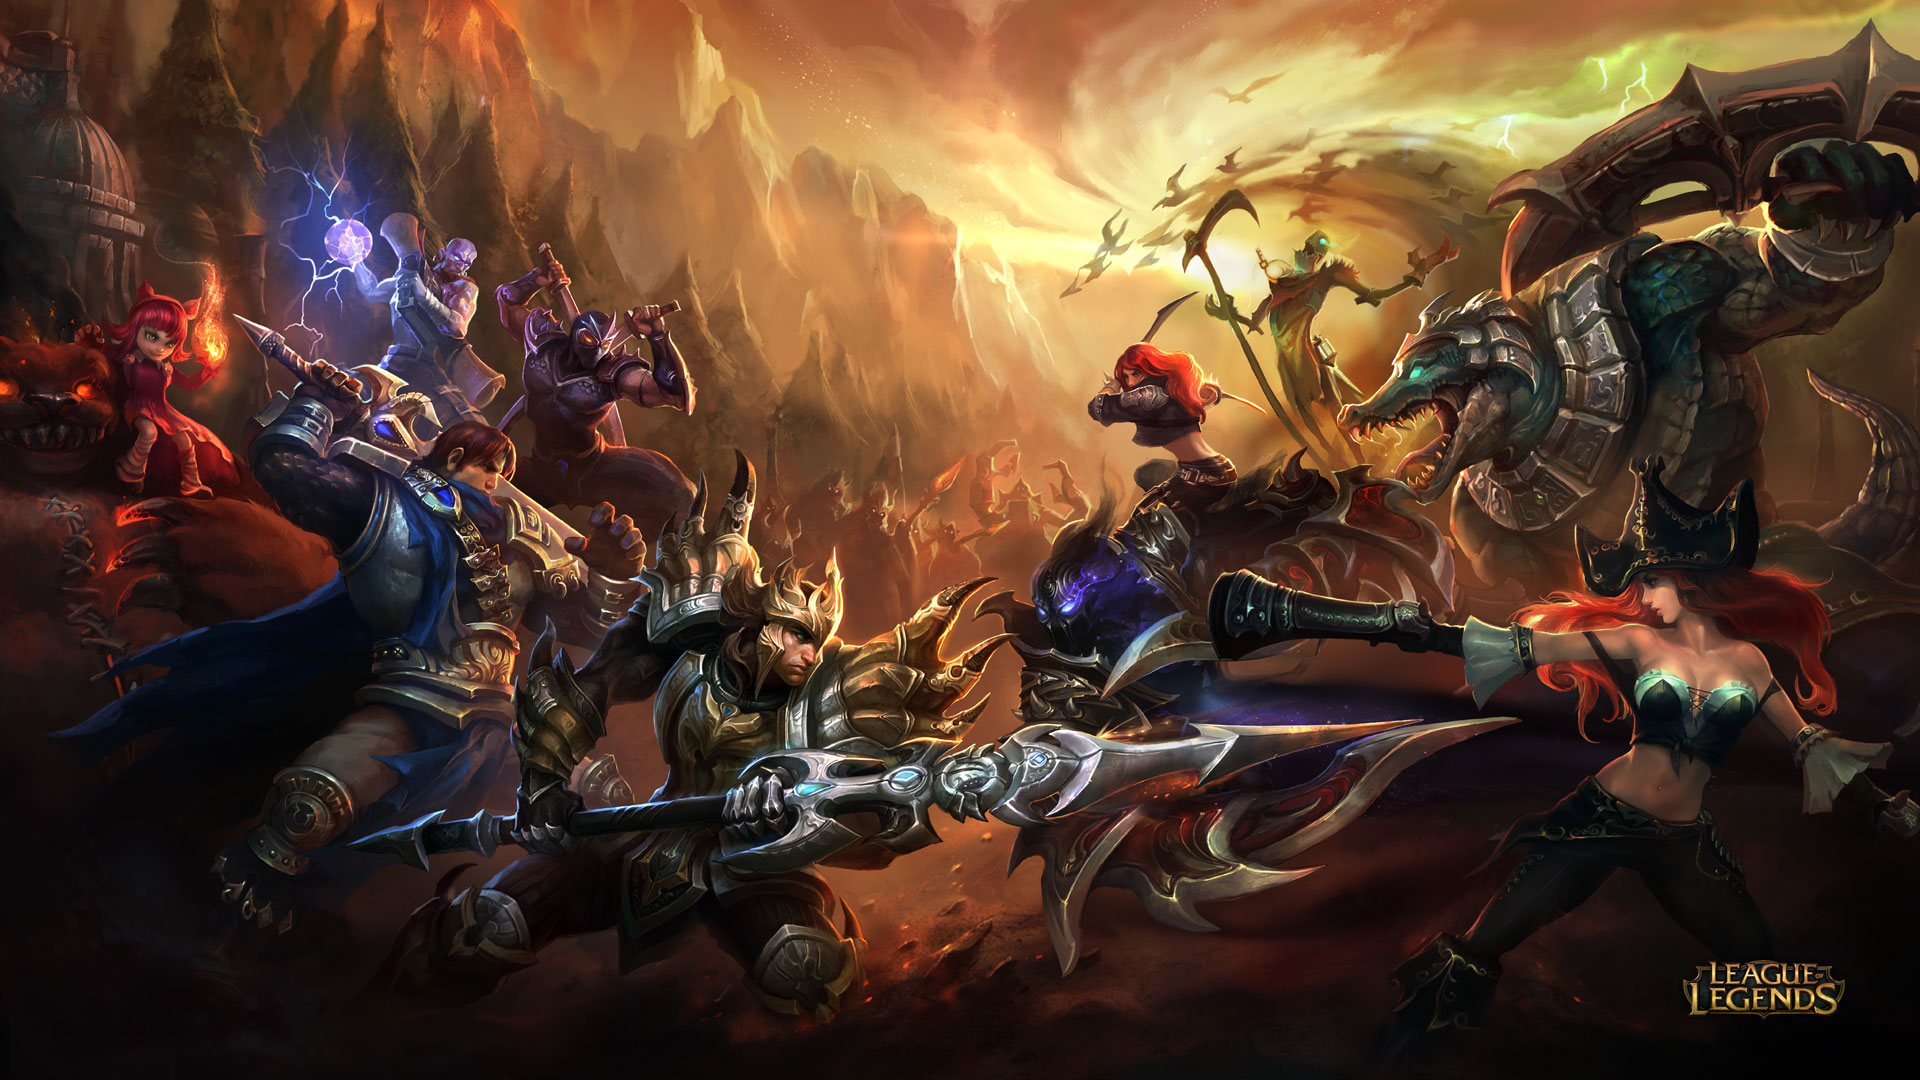 Download Now League of Legends Patch 5.6 to Get New Buffs to Old ...